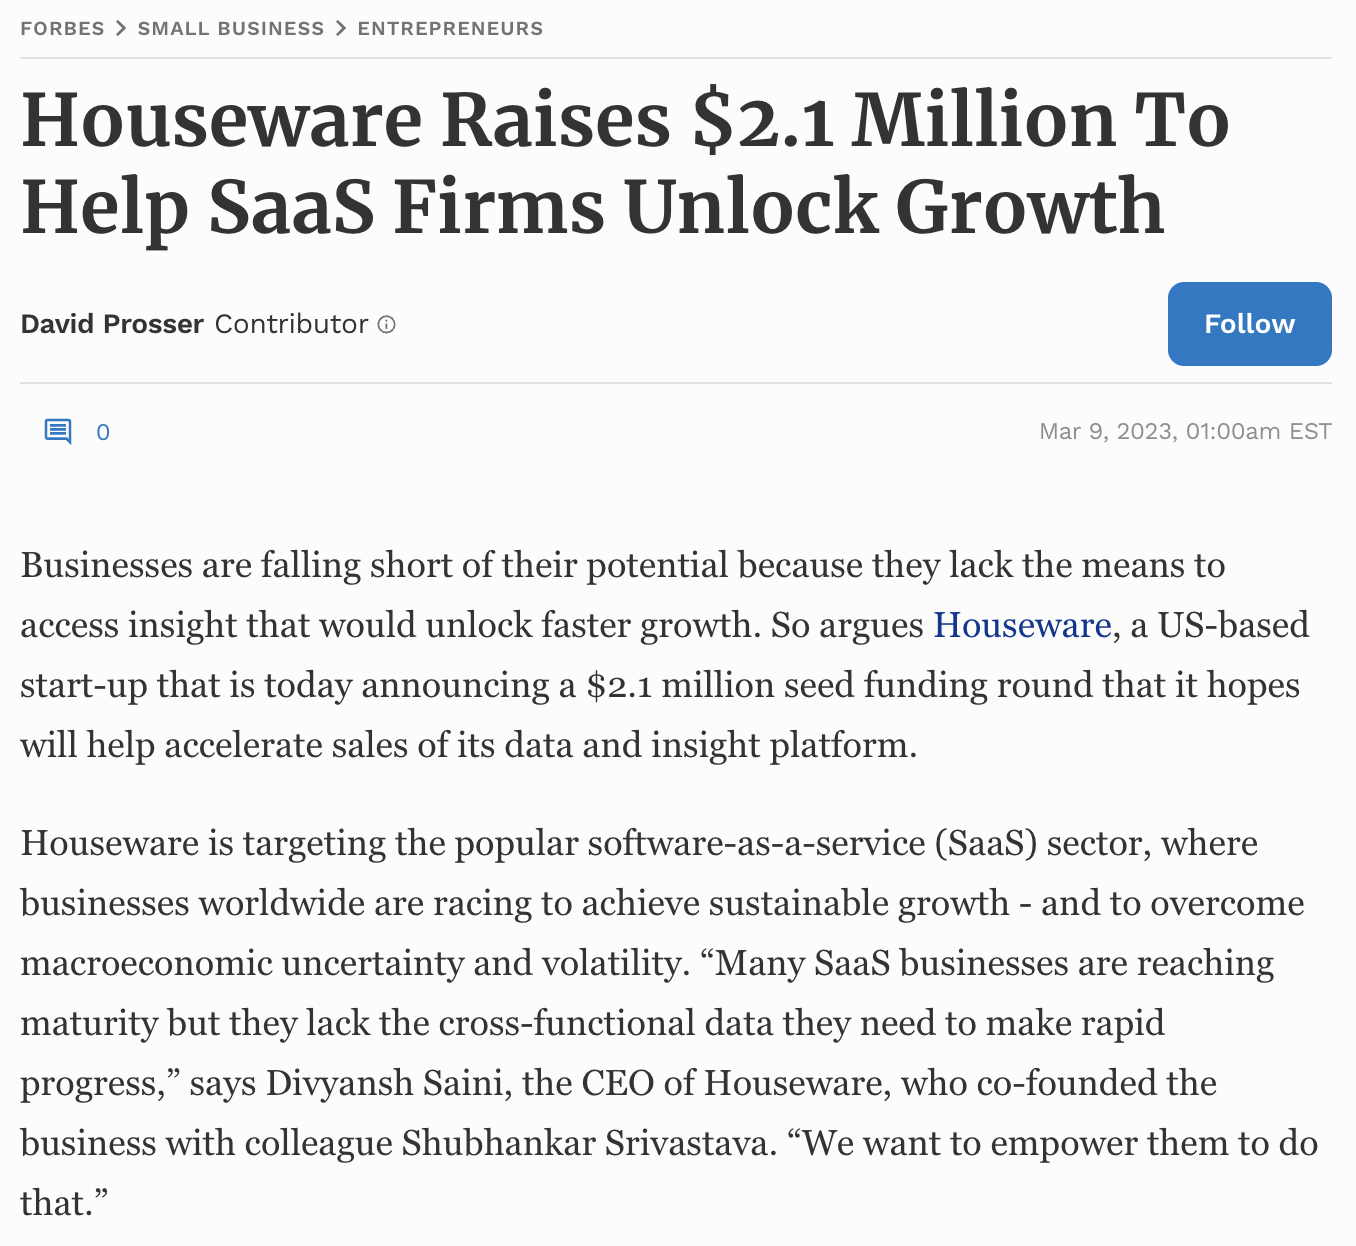 Forbes's article titled "Houseware raises $2.1 million to help SaaS firms unlock growth"